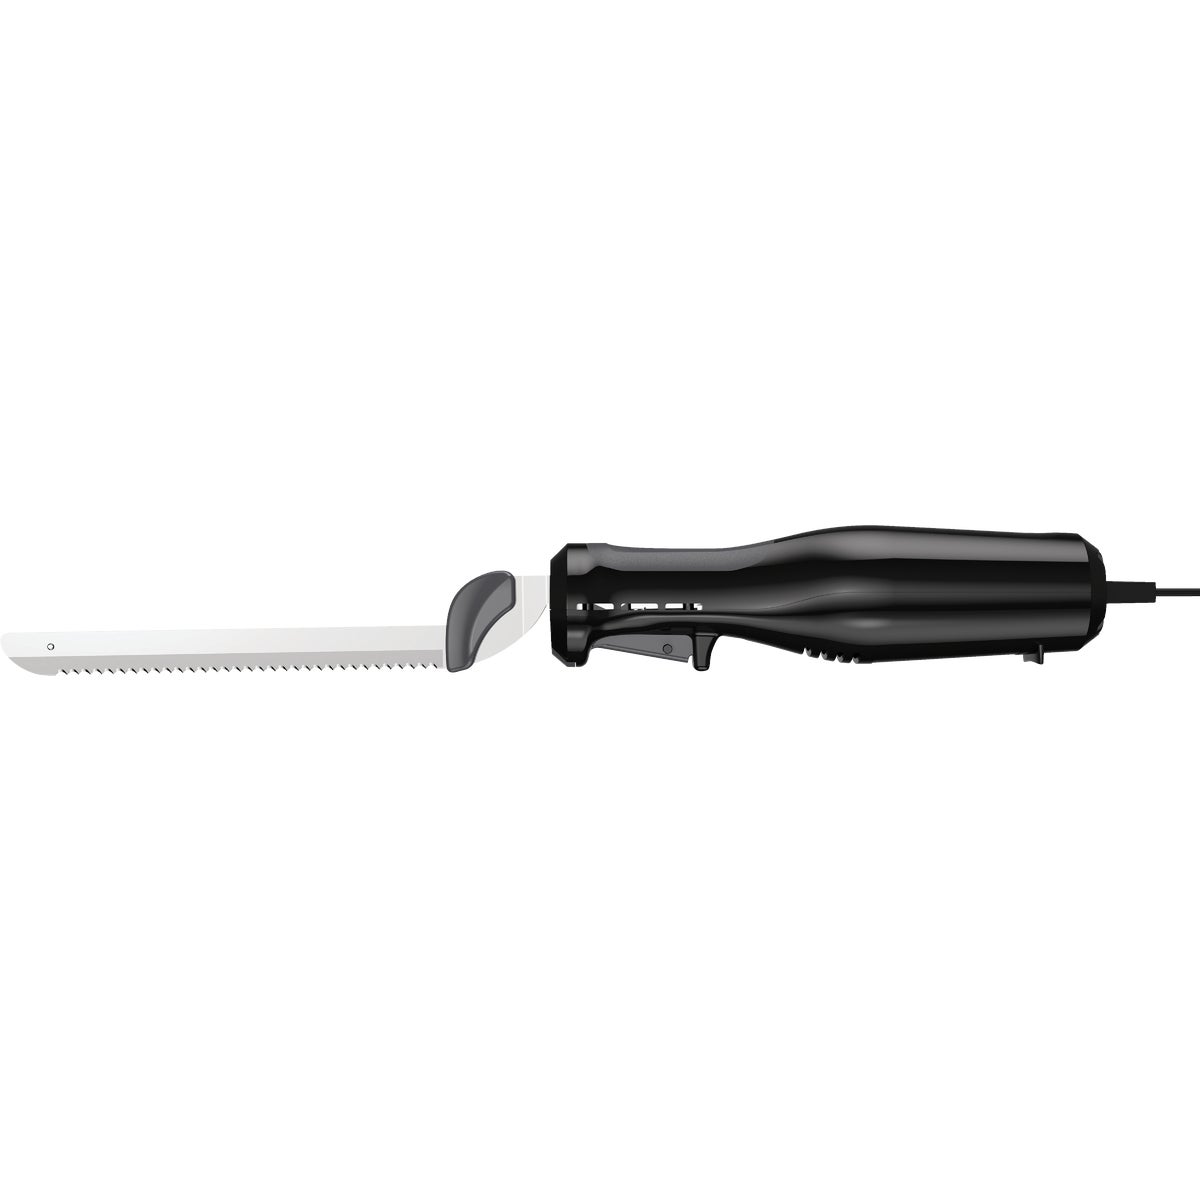 Item 658167, Black &amp; Decker Electric Knife makes quick work of carving meat, slicing